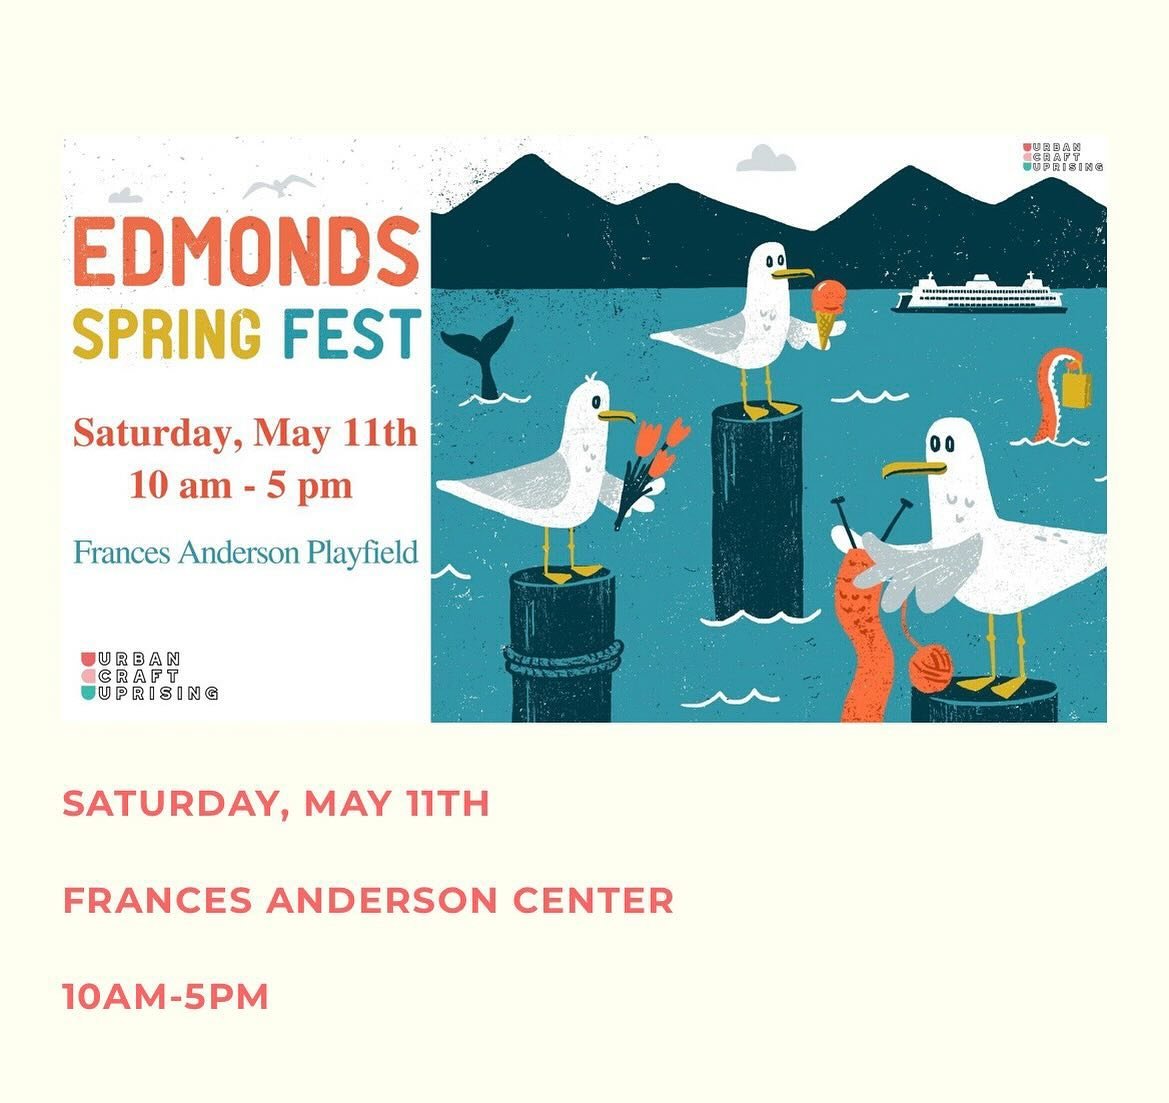 A little reminder that I will be at this event this weekend, hosted by @urbancraftuprising! So if you are in the area, come stop by, say HI! and snag some delicious treats for your ma, or yourself 😁
&bull;
&bull;
#yetichocolates #edmondswa #edmondss